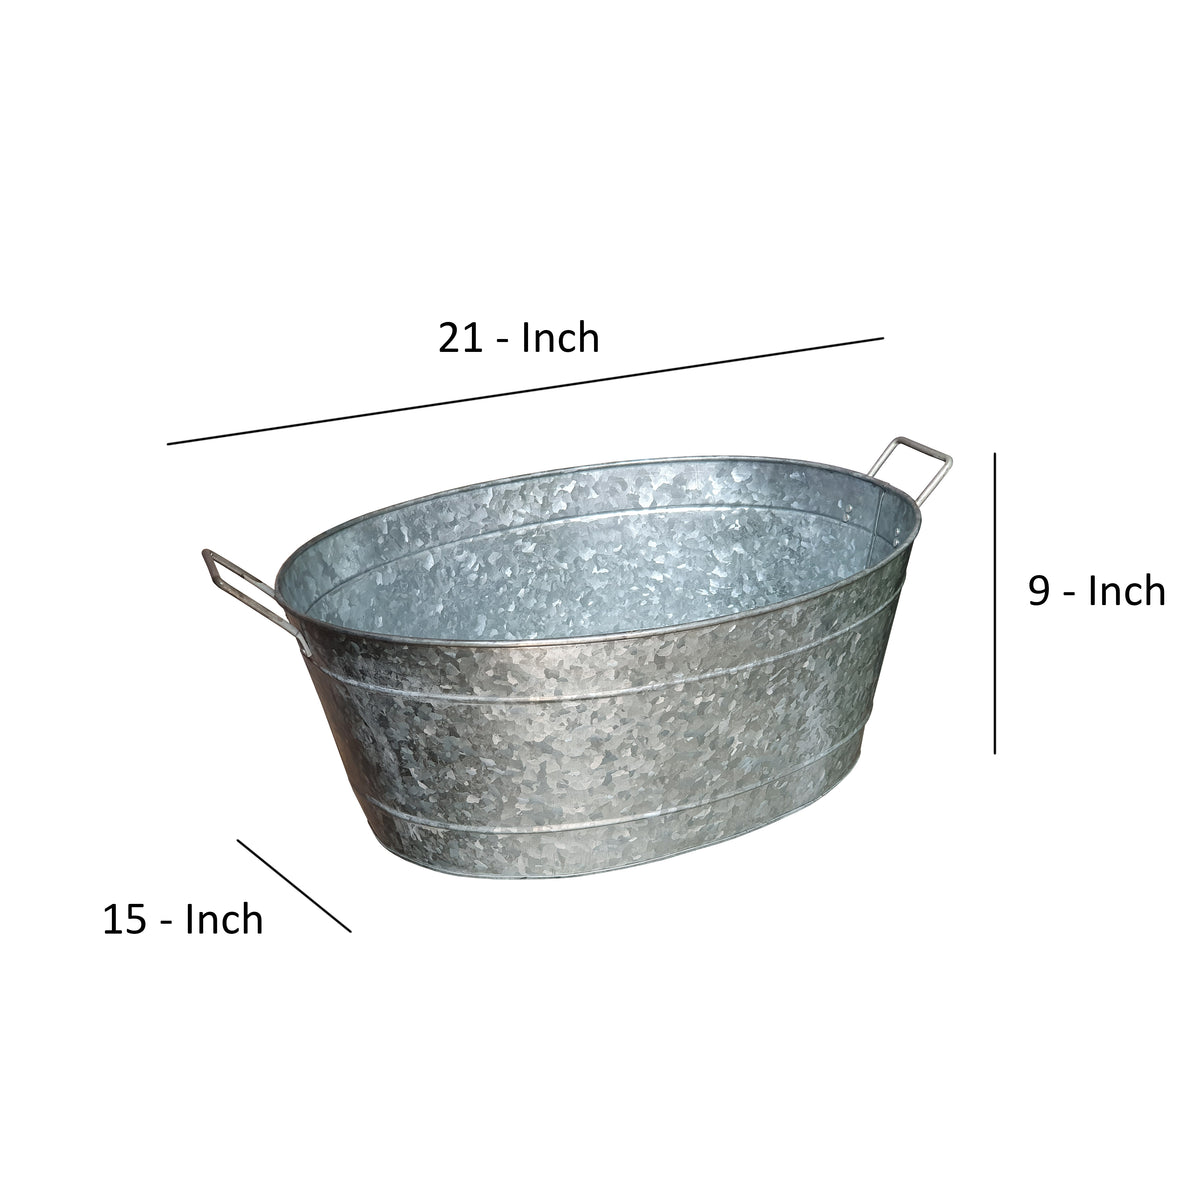 Lola Embossed Design Oval Shape Galvanized Steel Tub with Side Handles, Small, Silver - BM195212